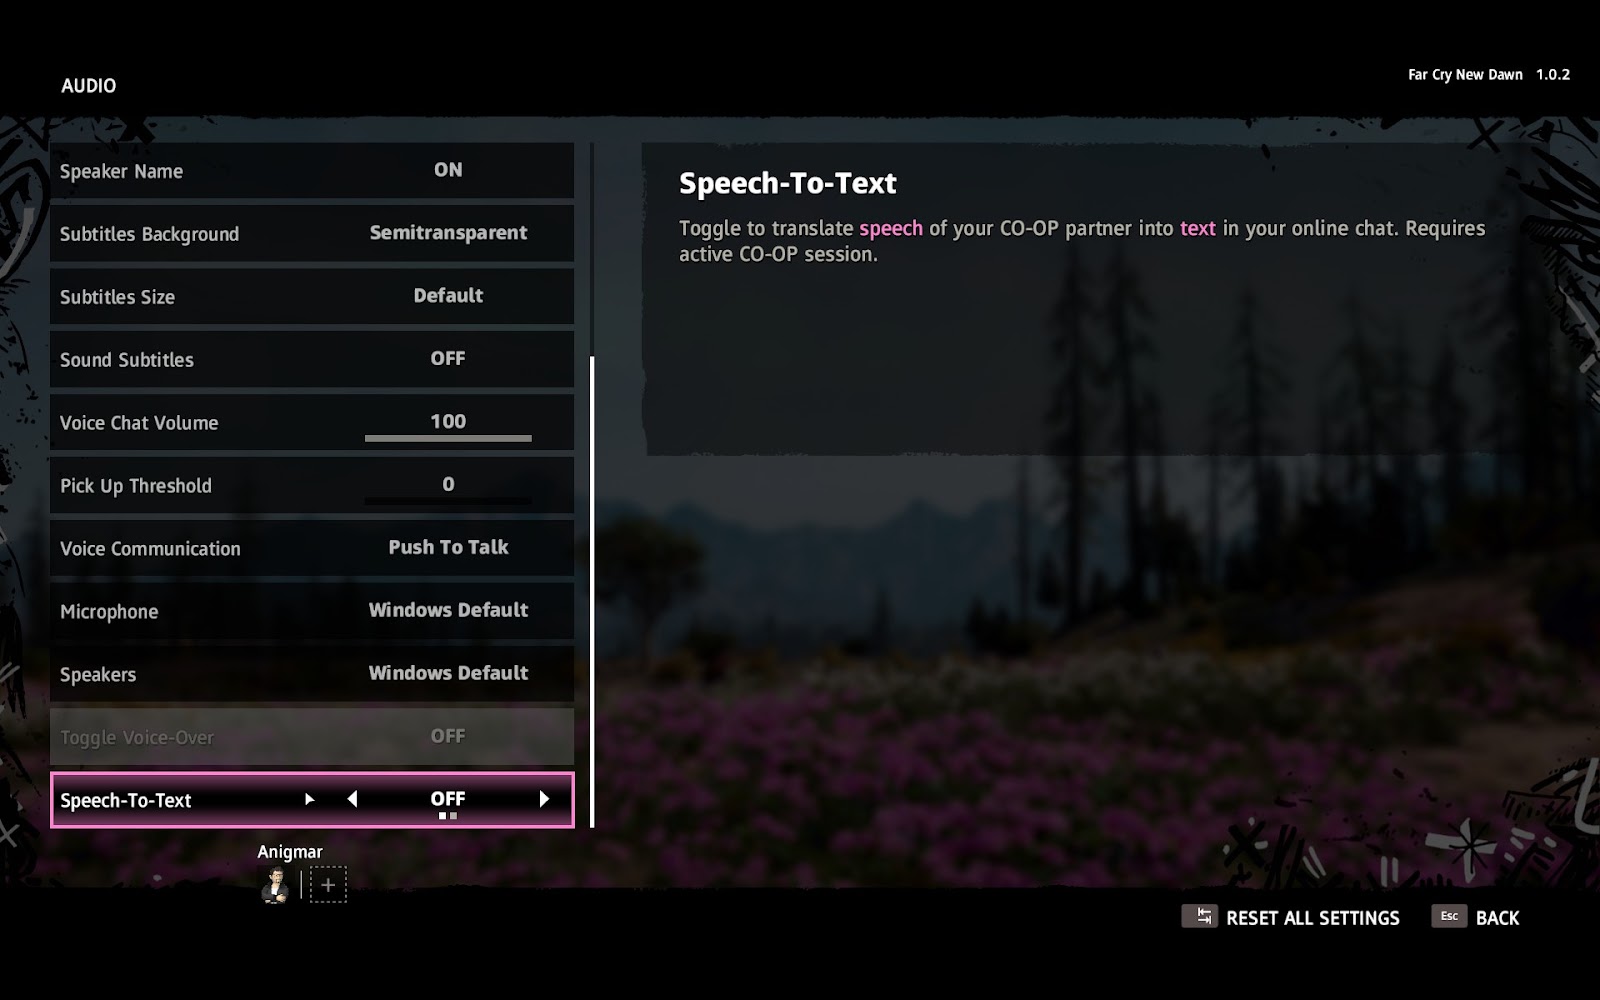 Audio menu with subtitles options, voice chat and speech to text function